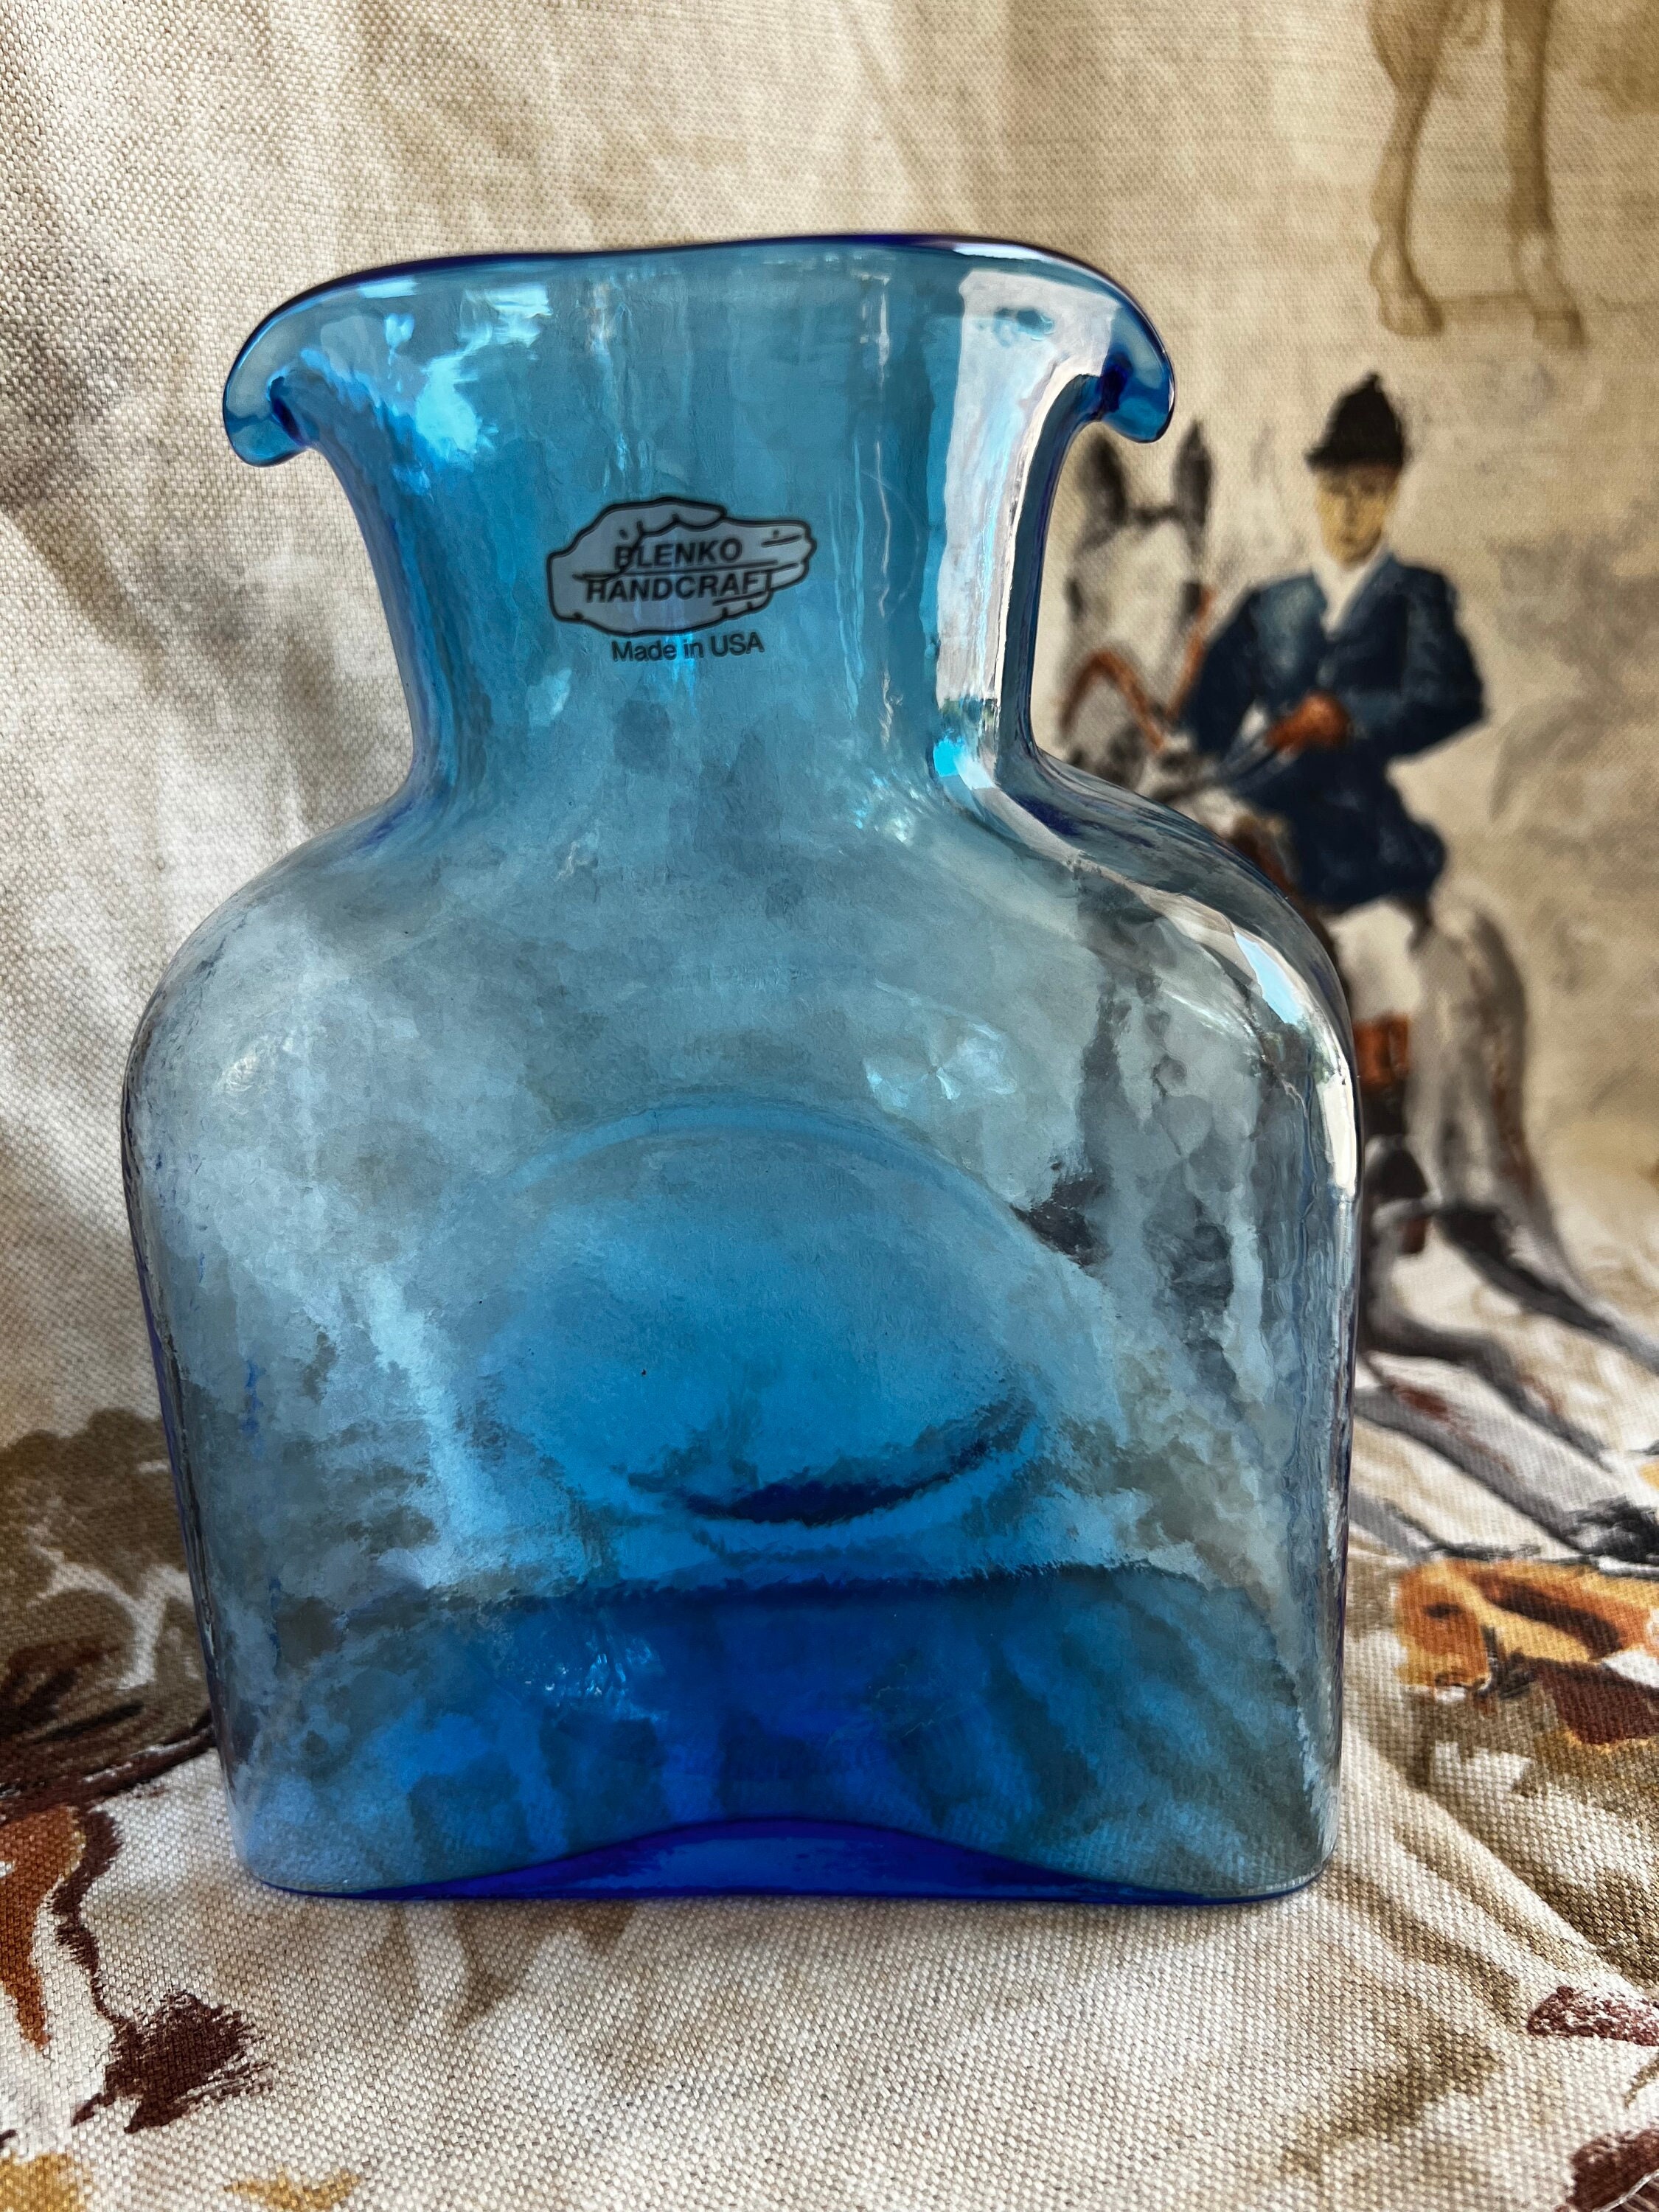 Blenko Water Pitcher – With These Hands Gallery